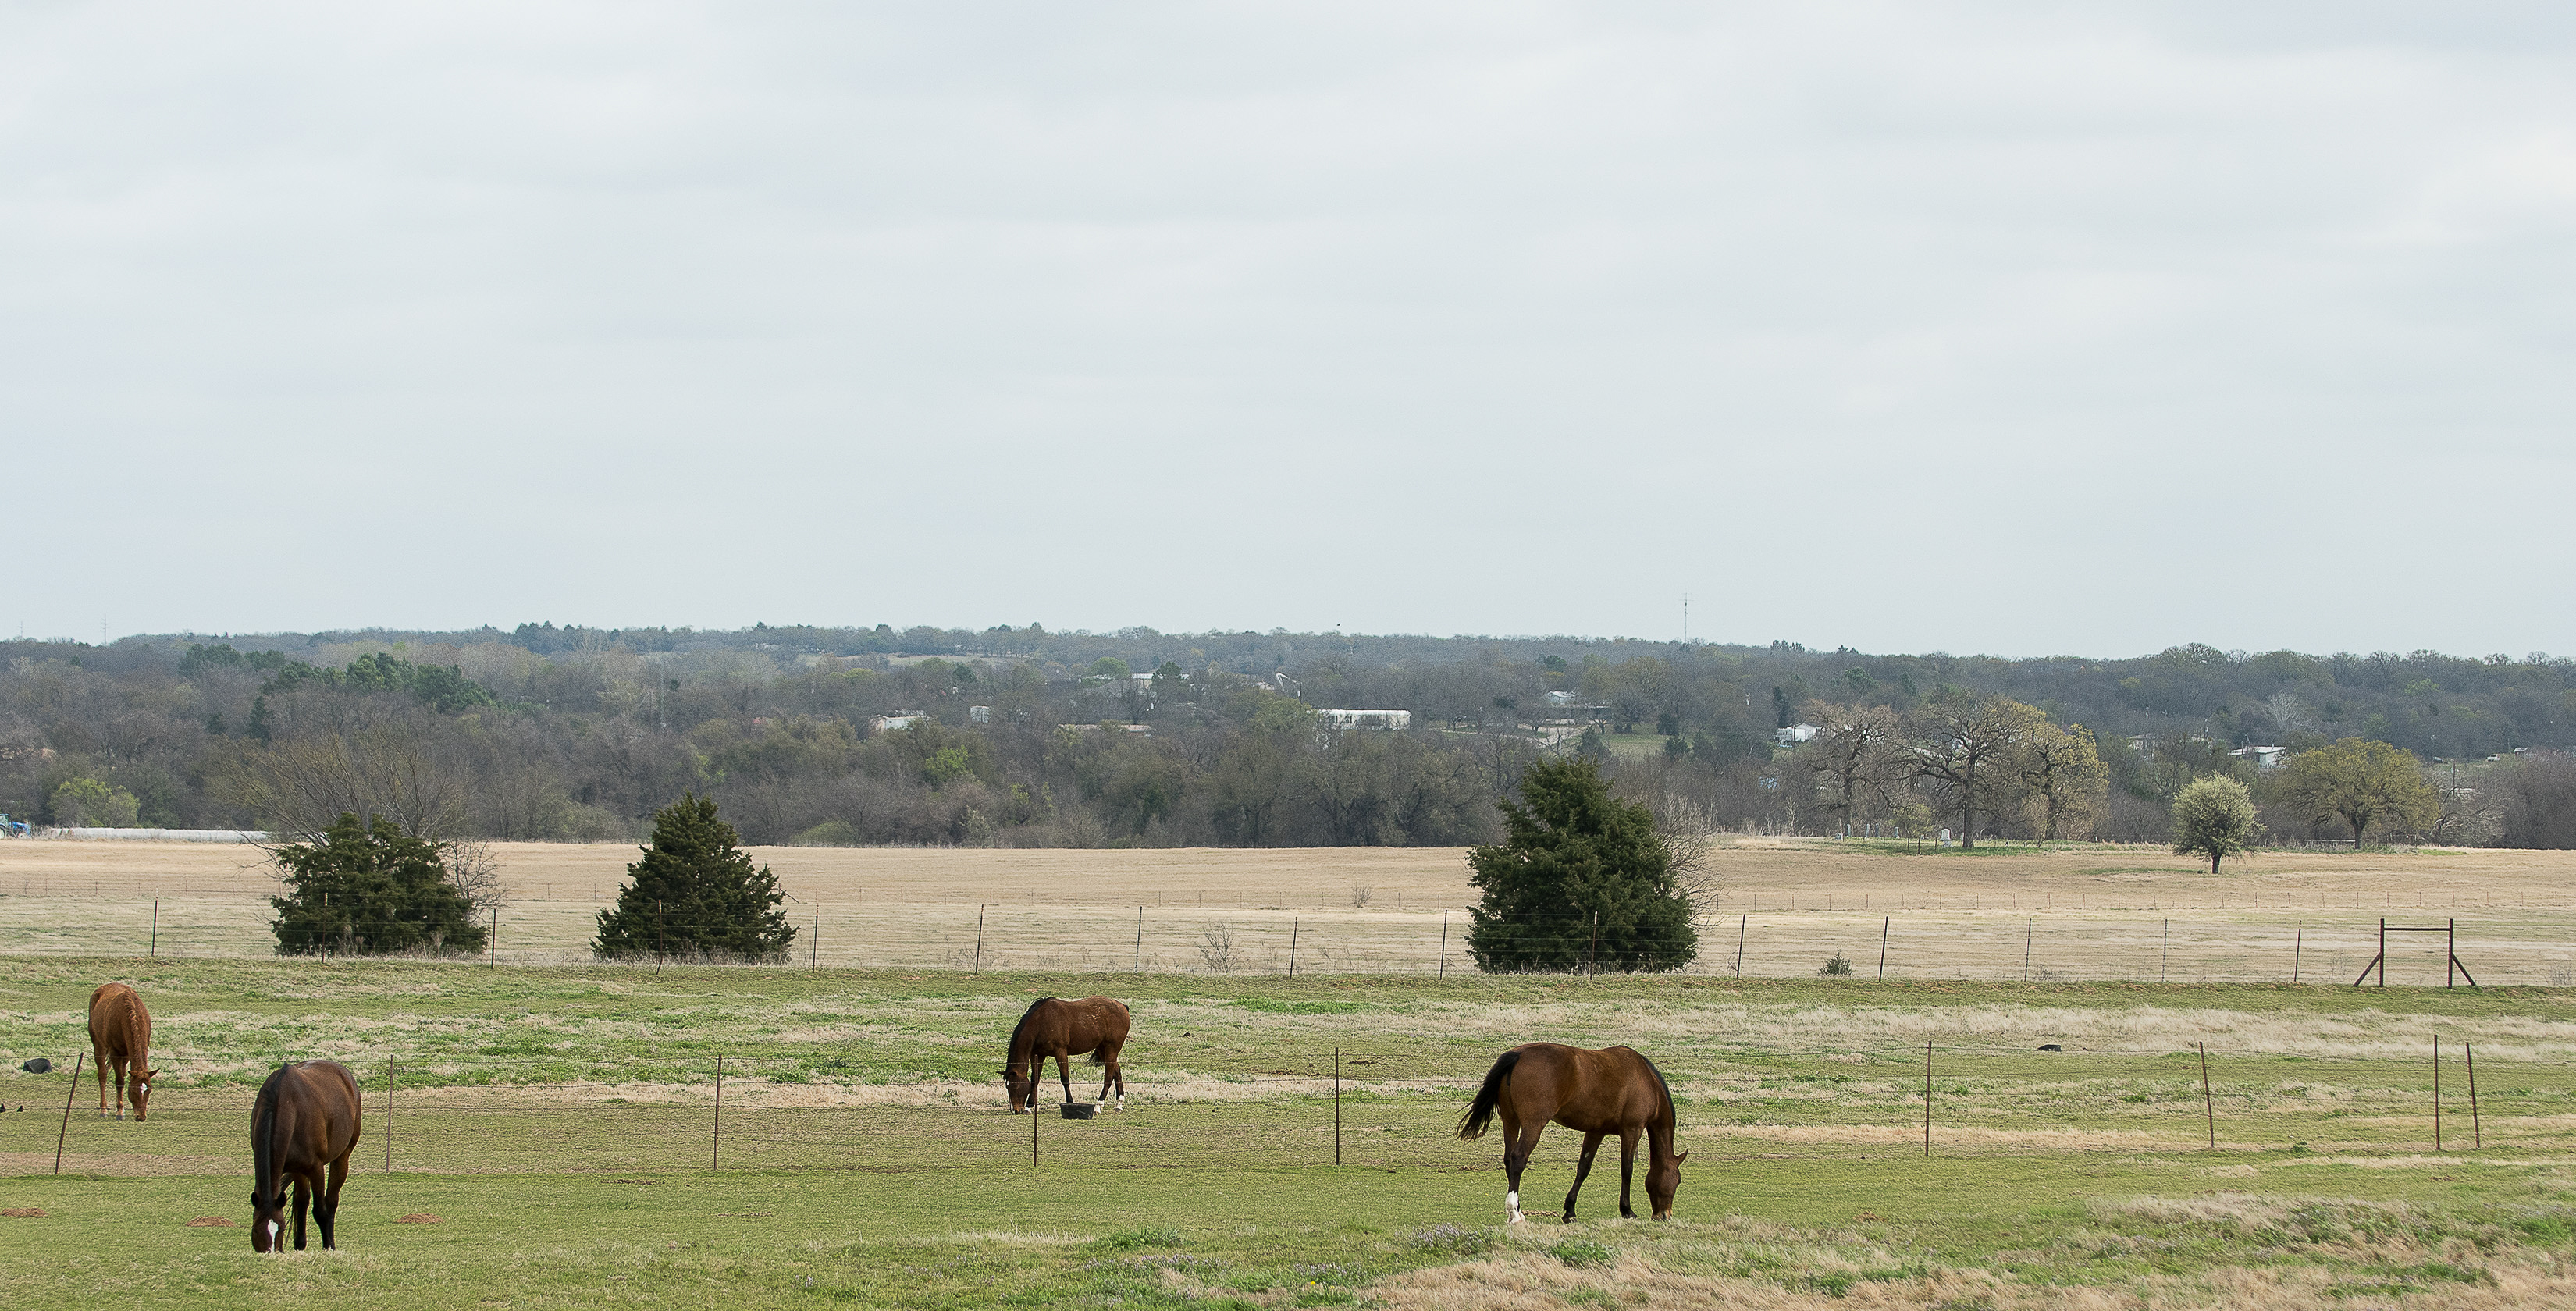 Equine athletes graze at Turning Point Ranch, TCU's practice facility in Springtown, Texas. Photo by Glen E. Ellman